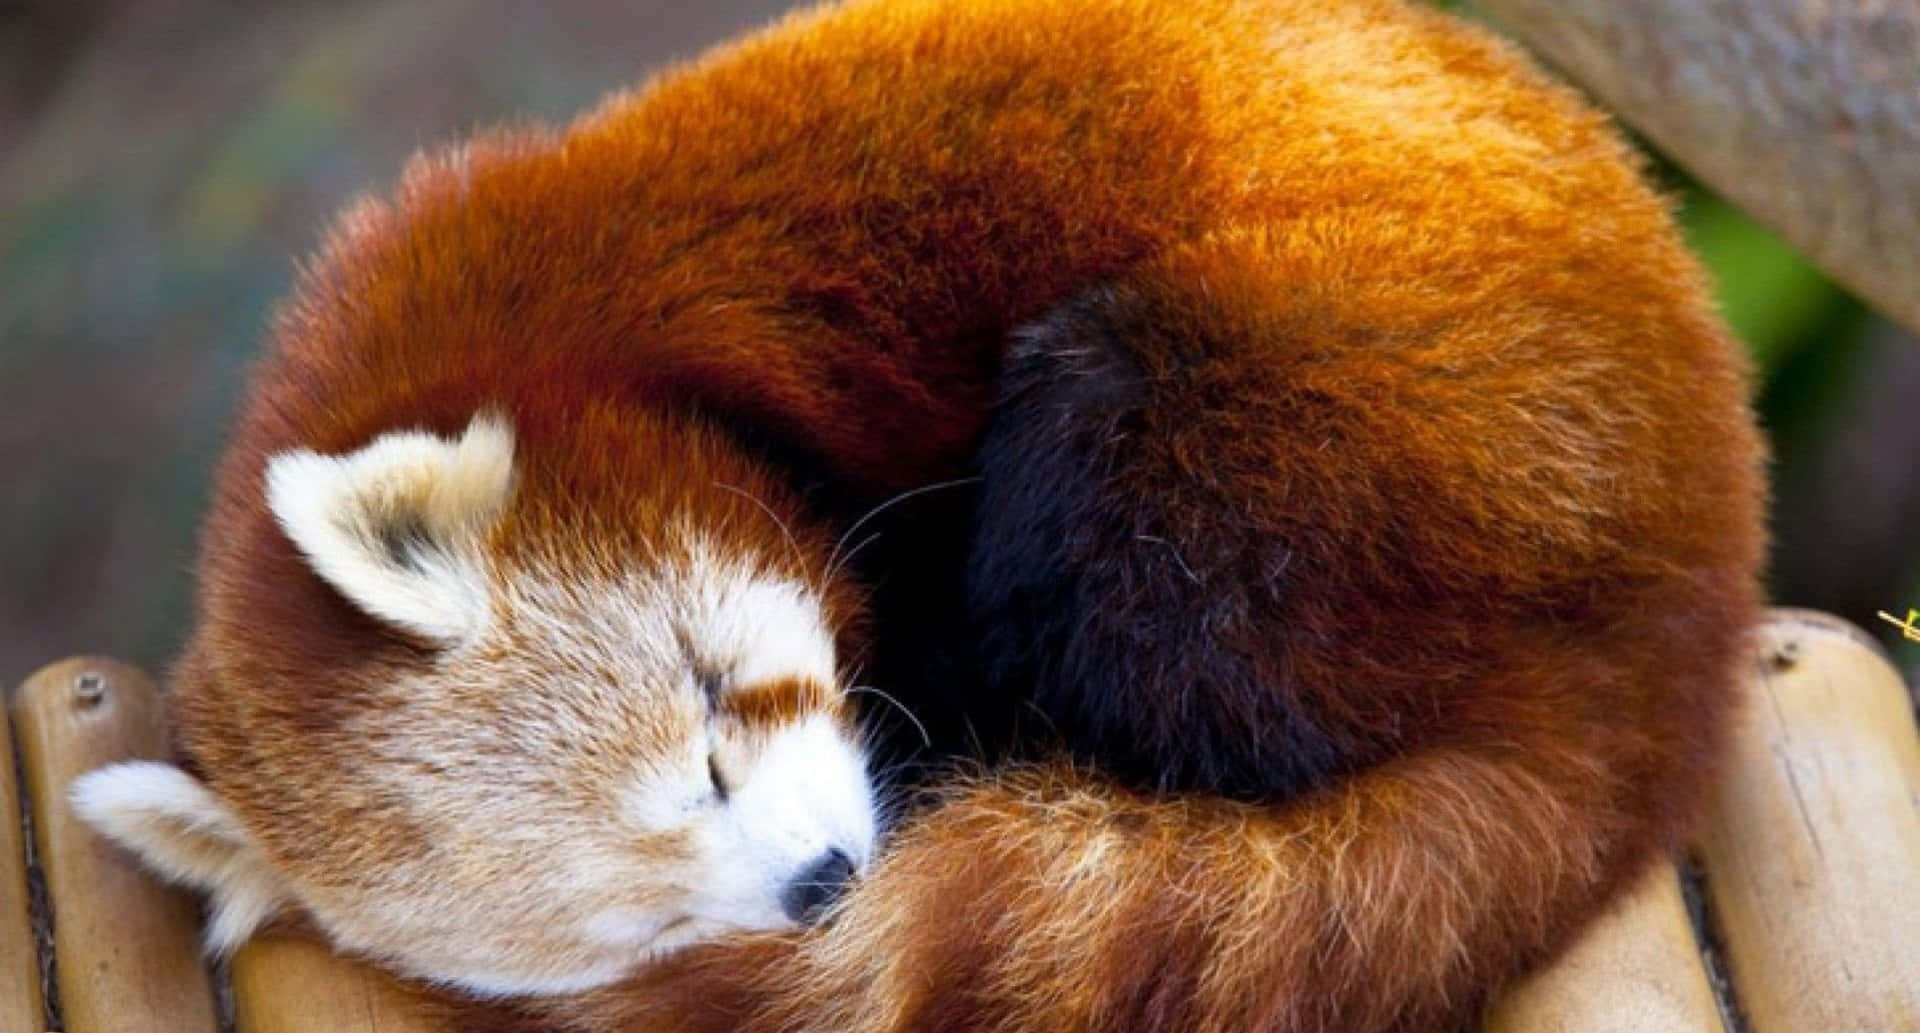 Cute Red Panda Curled Up Sleeping Picture